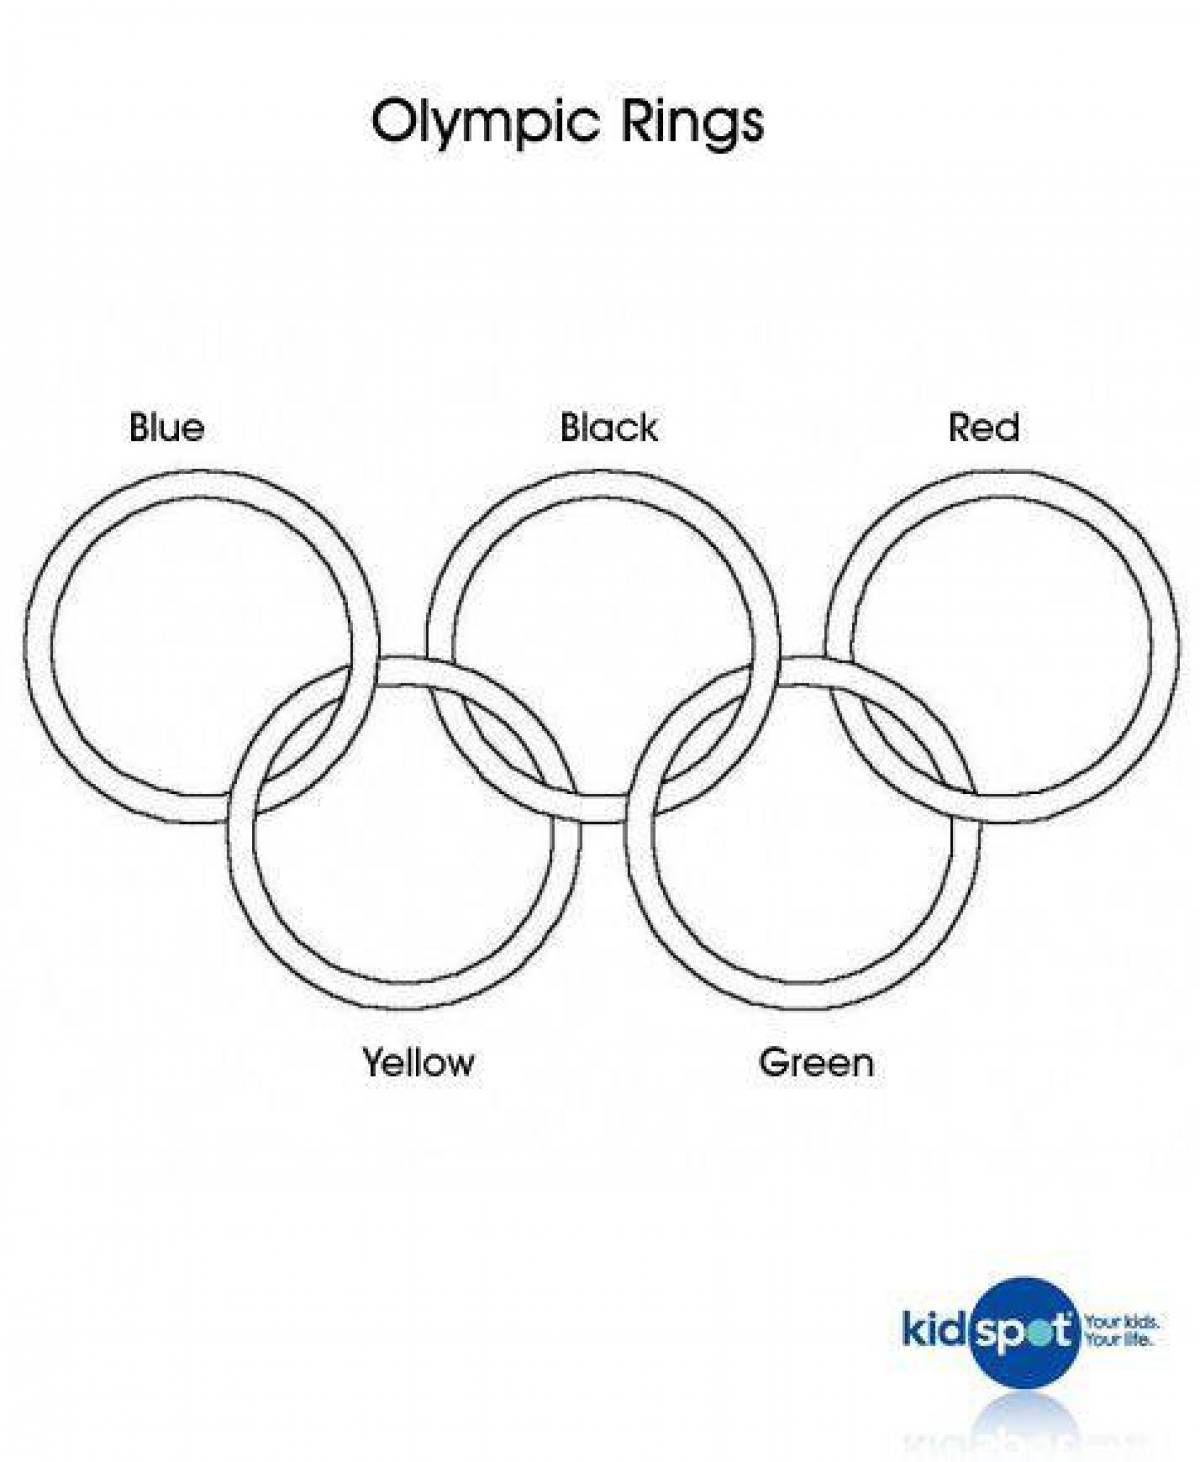 Luxury olympic rings coloring book